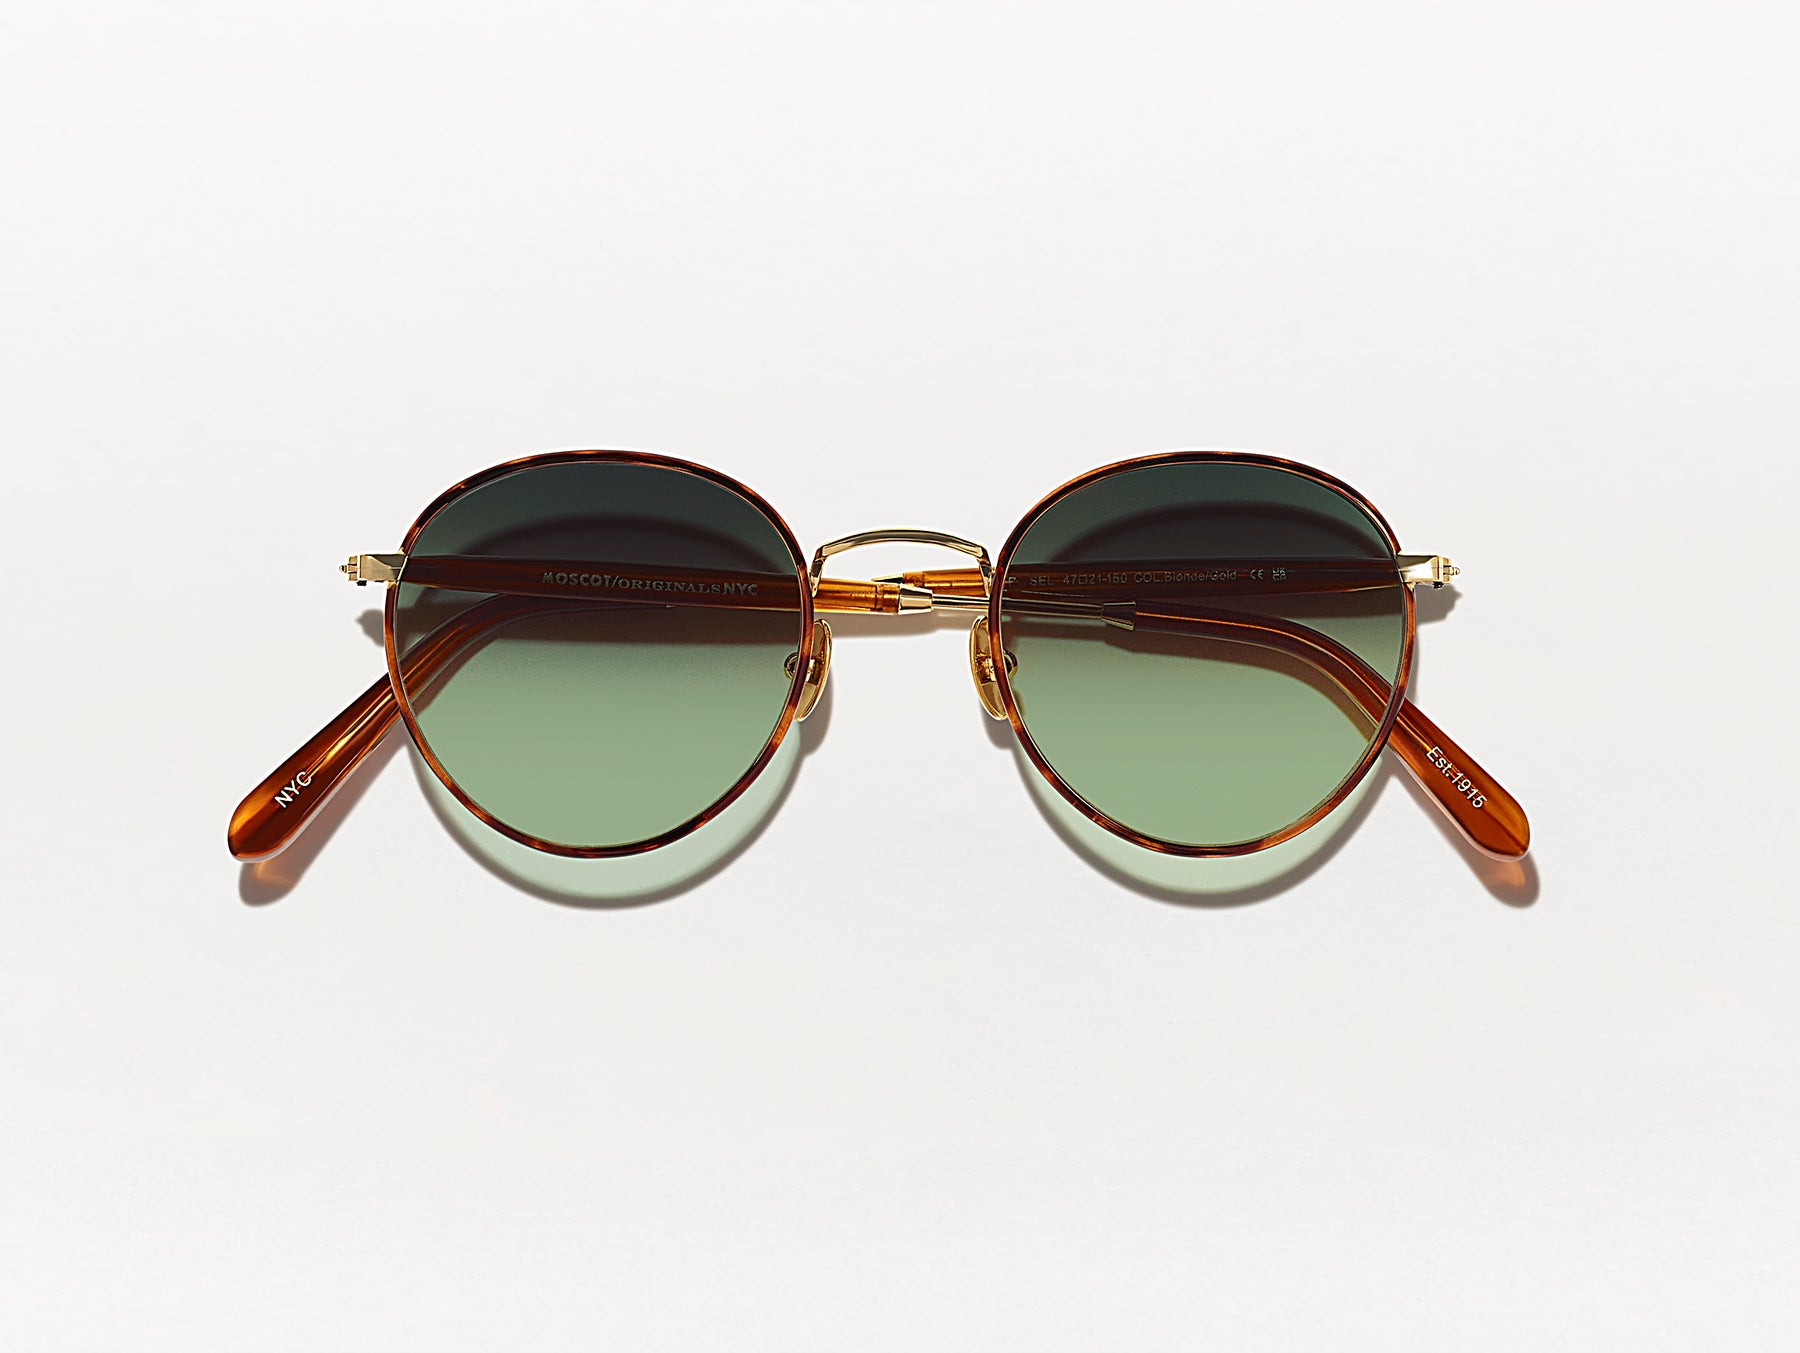 The PITSEL SUN in Blonde with Forest Wood Tinted Lenses